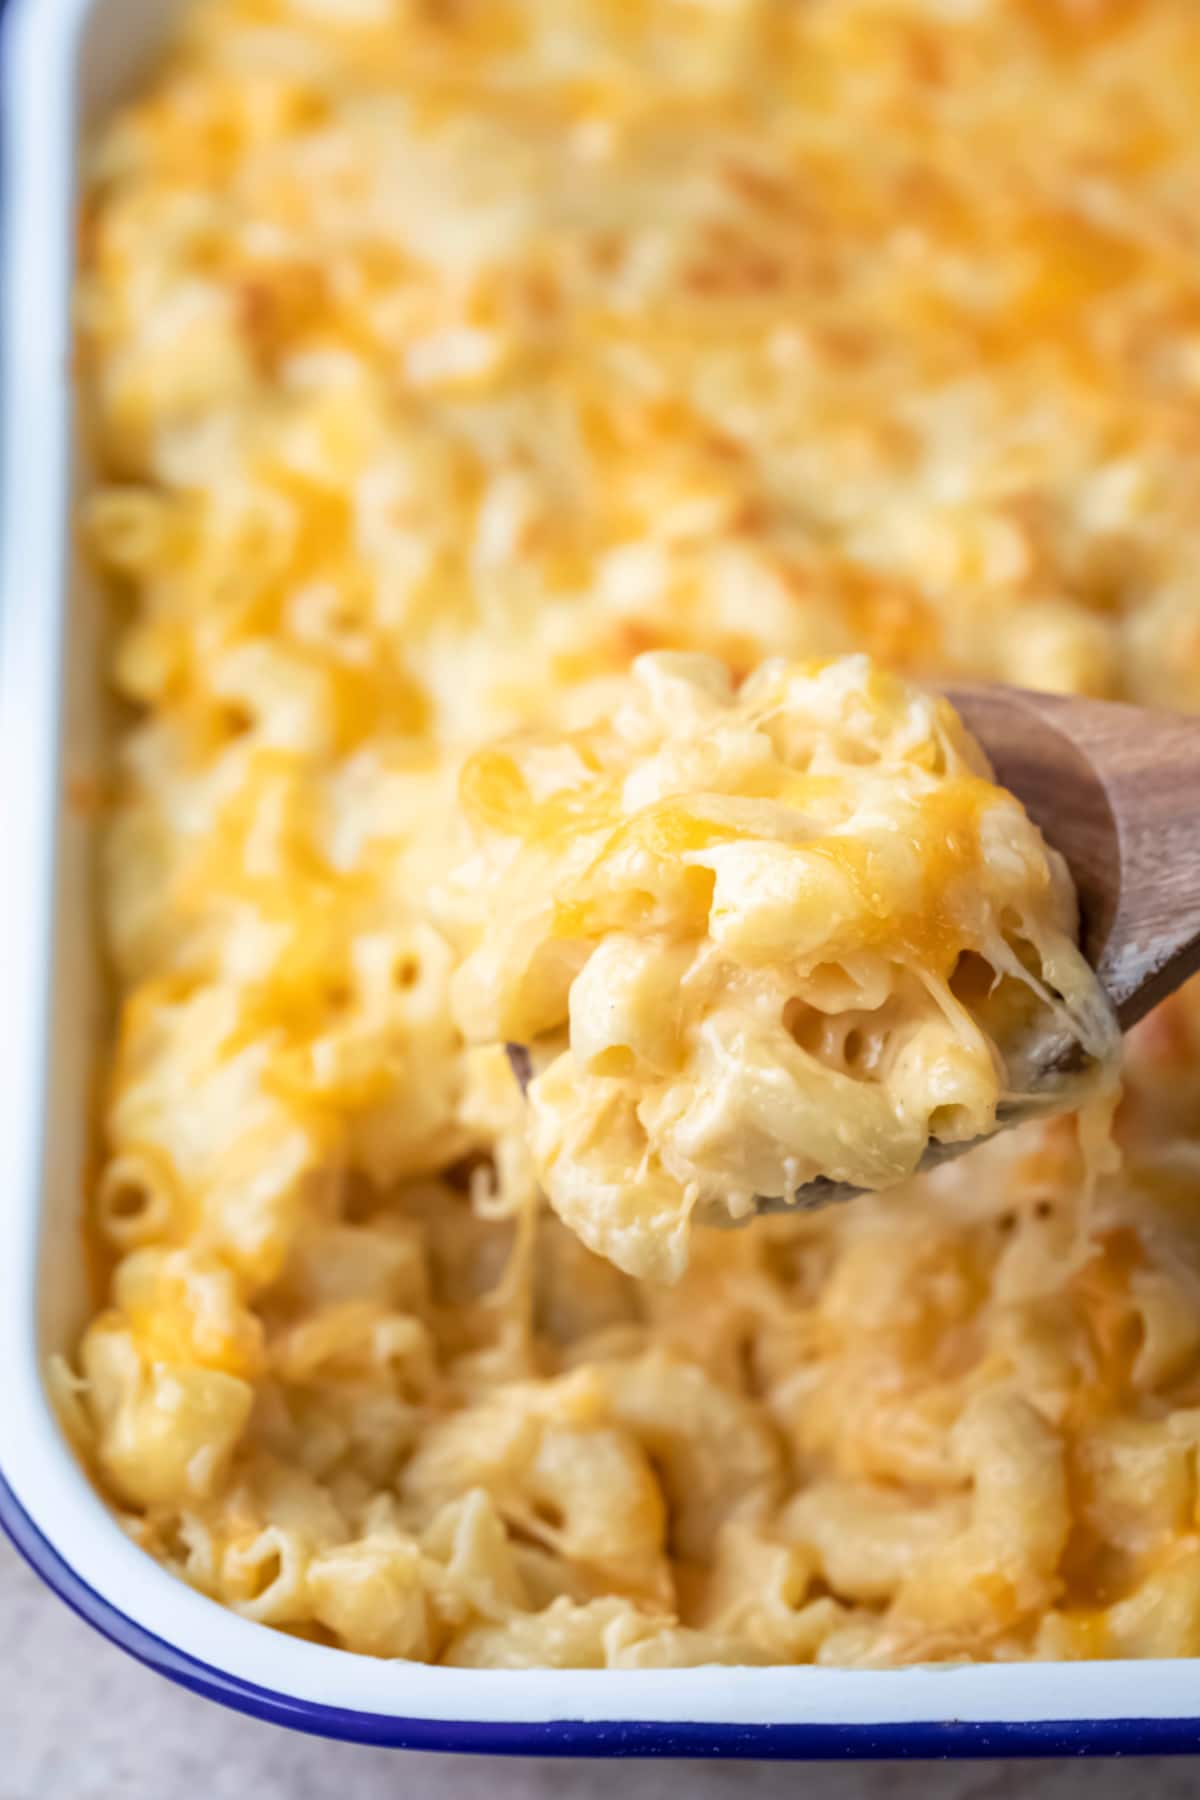 Baked Macaroni and Cheese - I Heart Eating